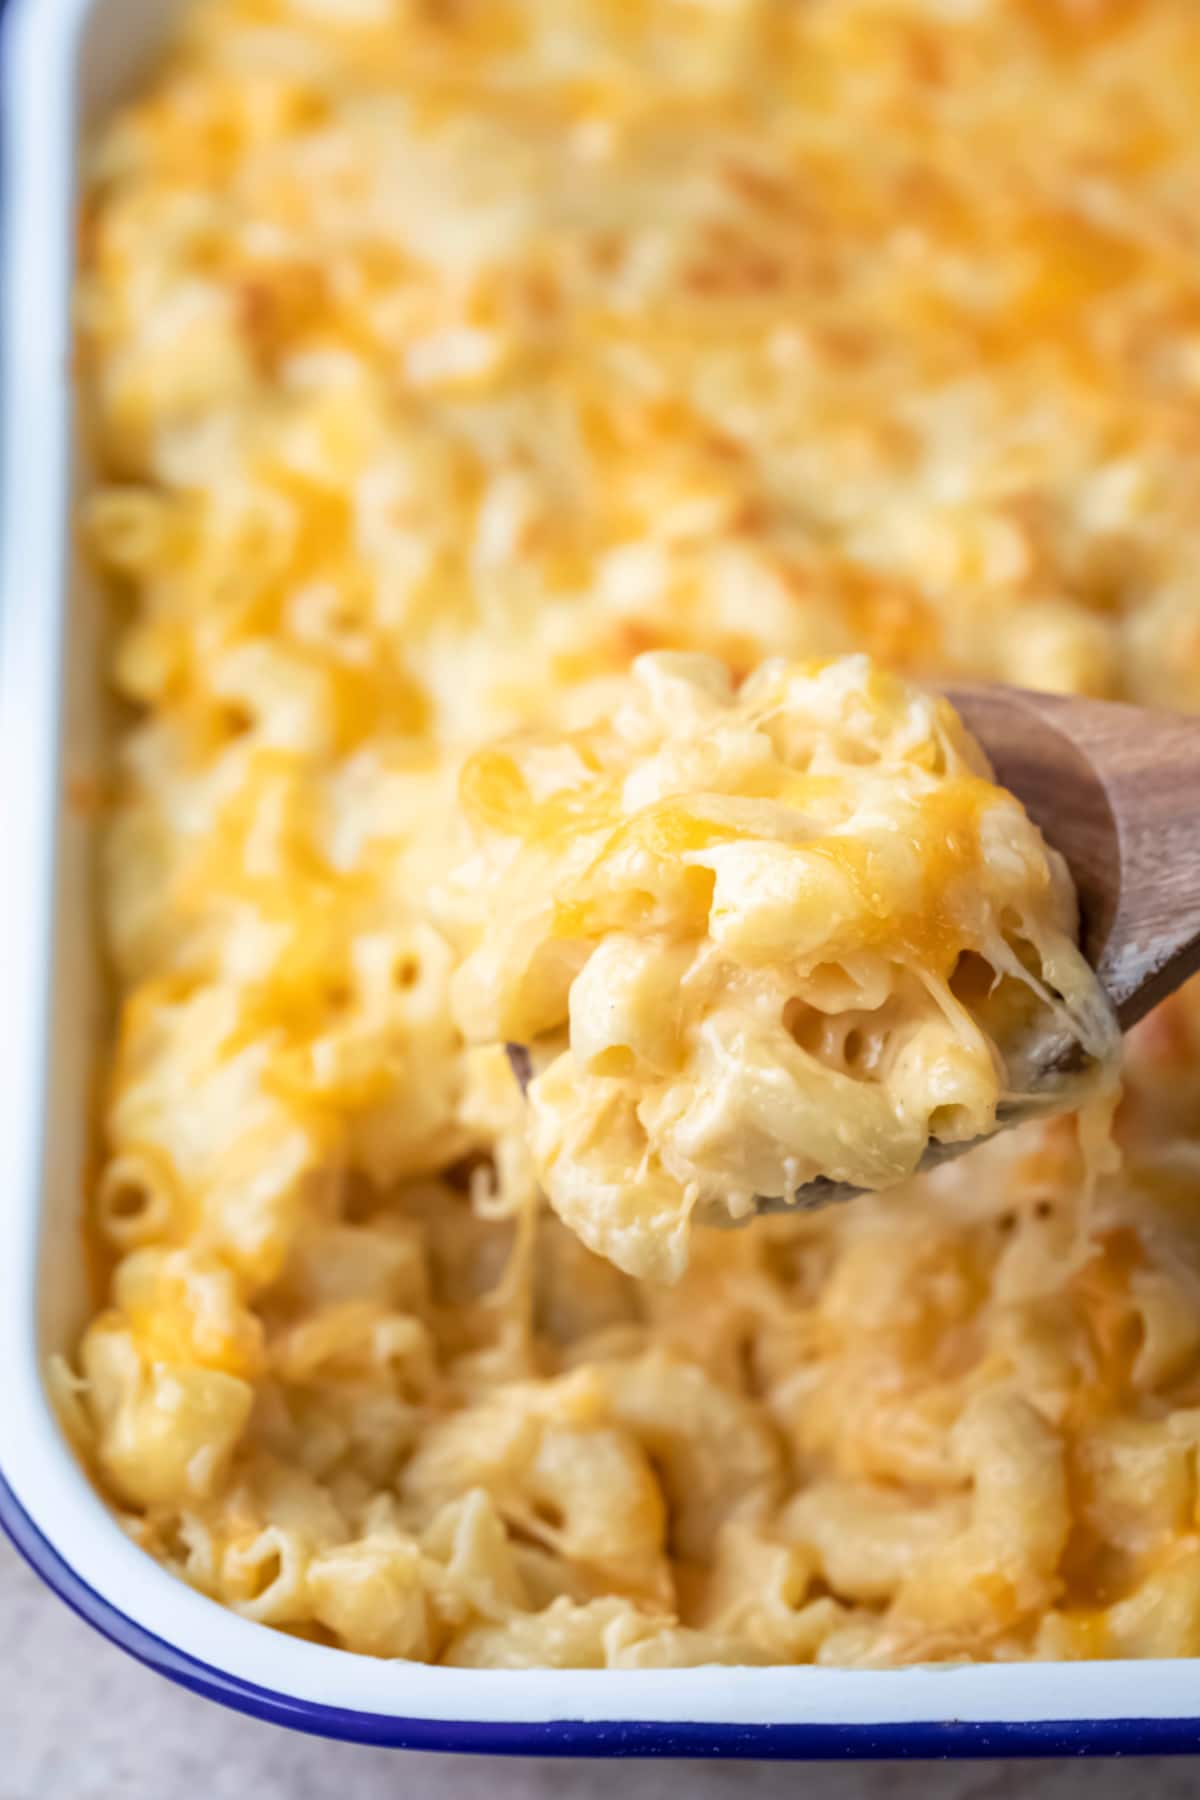 Baked Macaroni and Cheese - I Heart Eating